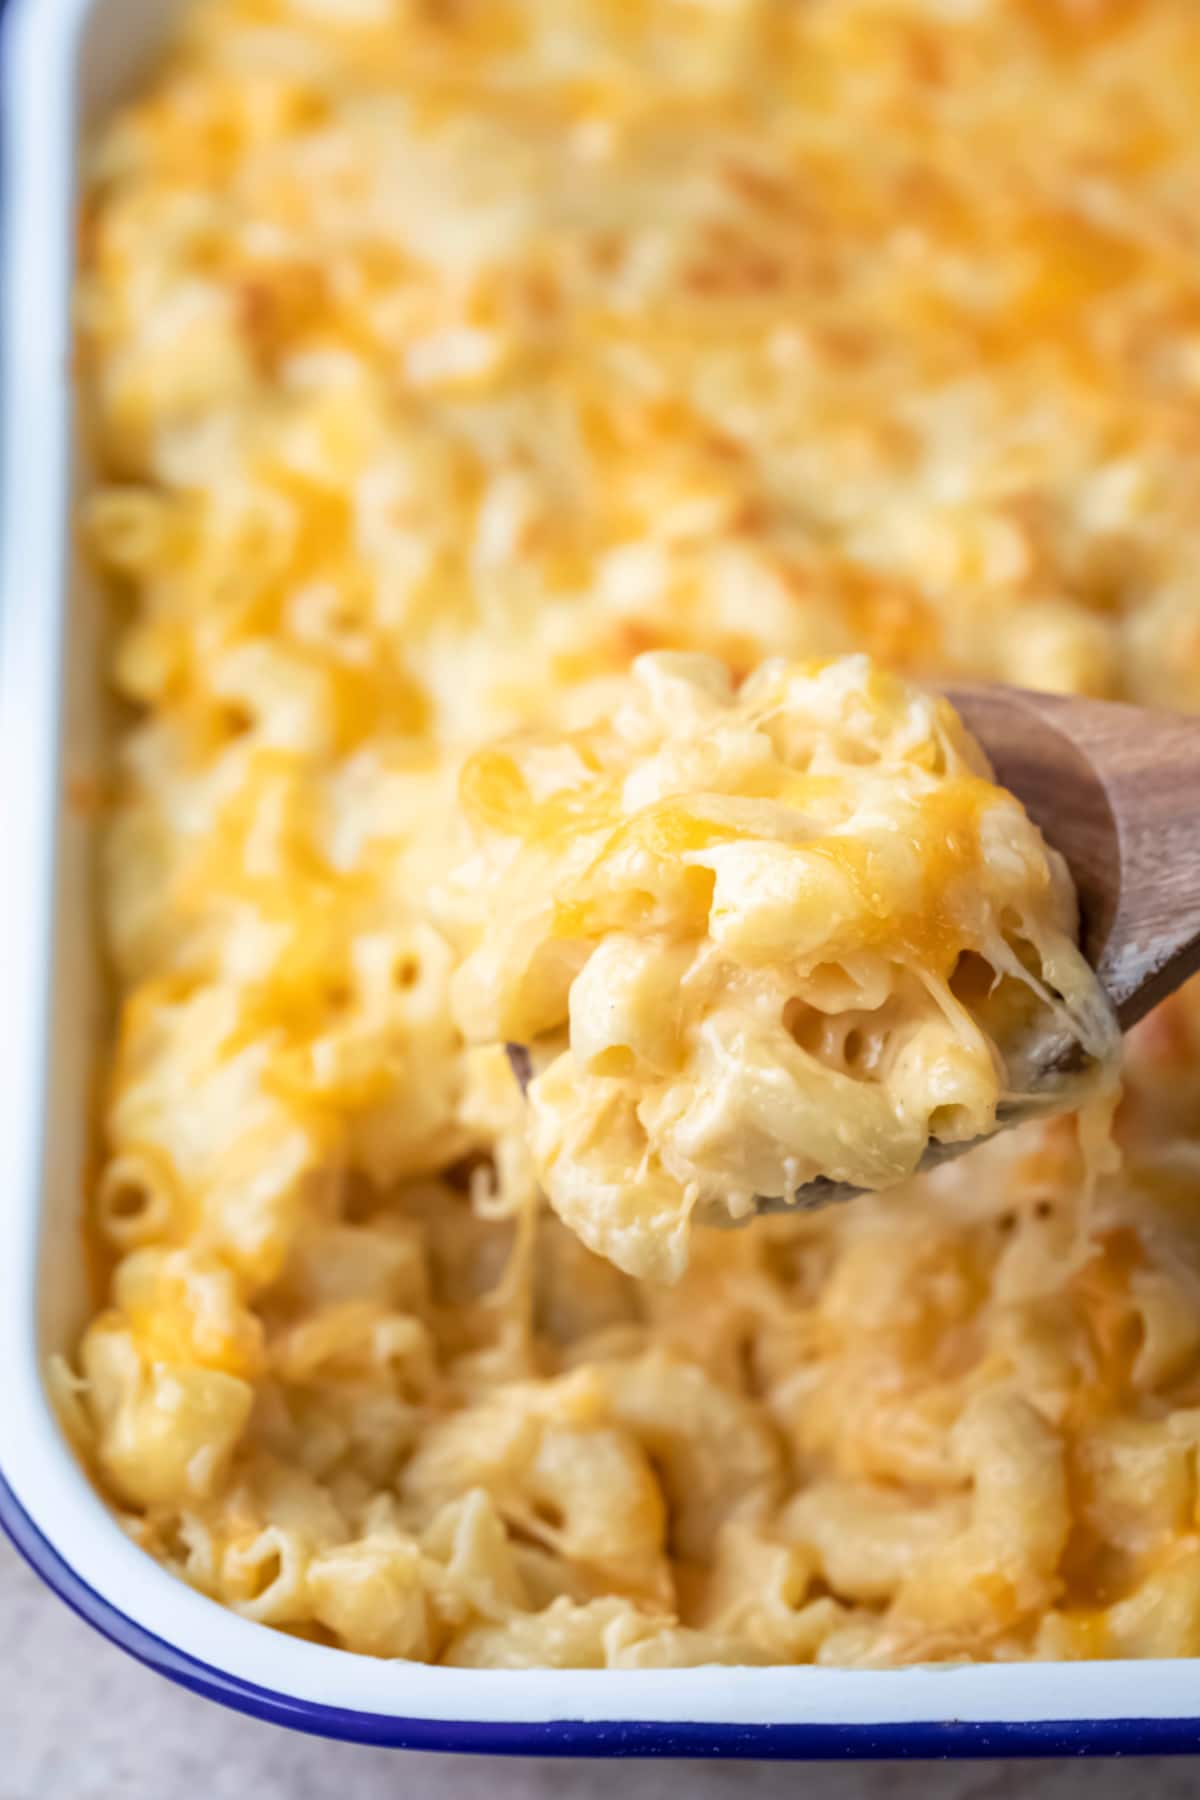 Baked Macaroni and Cheese - I Heart Eating